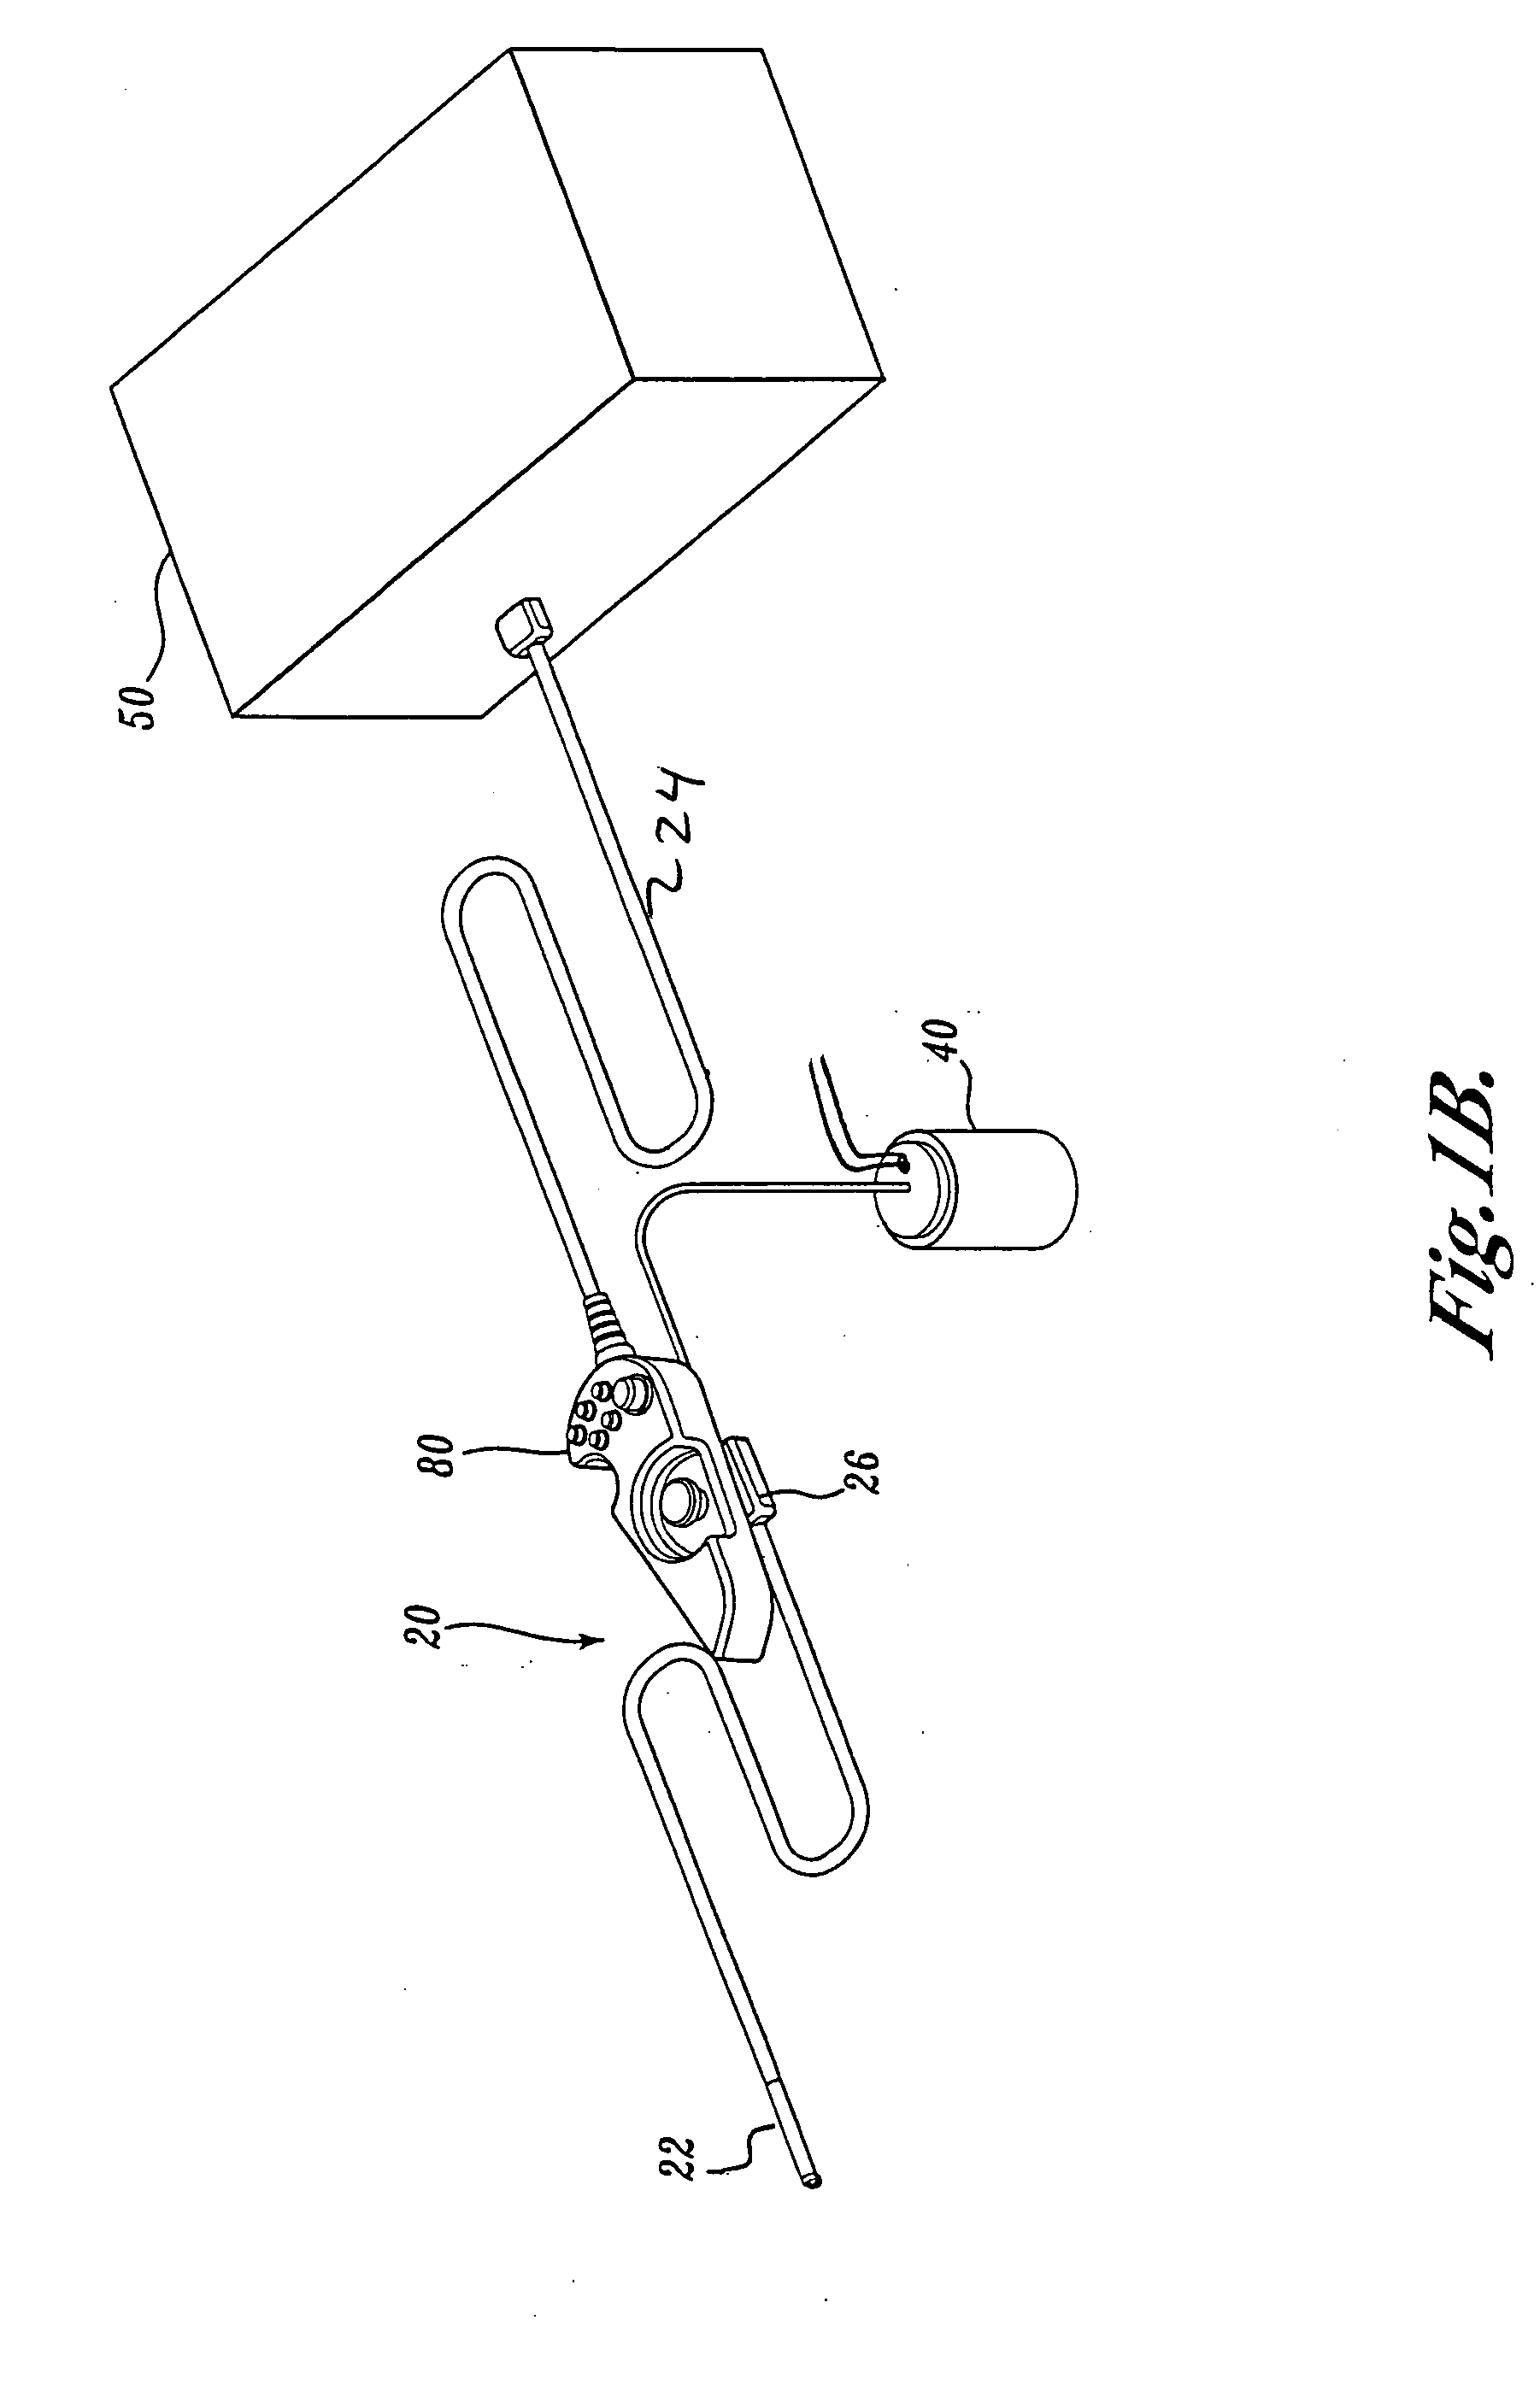 Force feedback control system for video endoscope